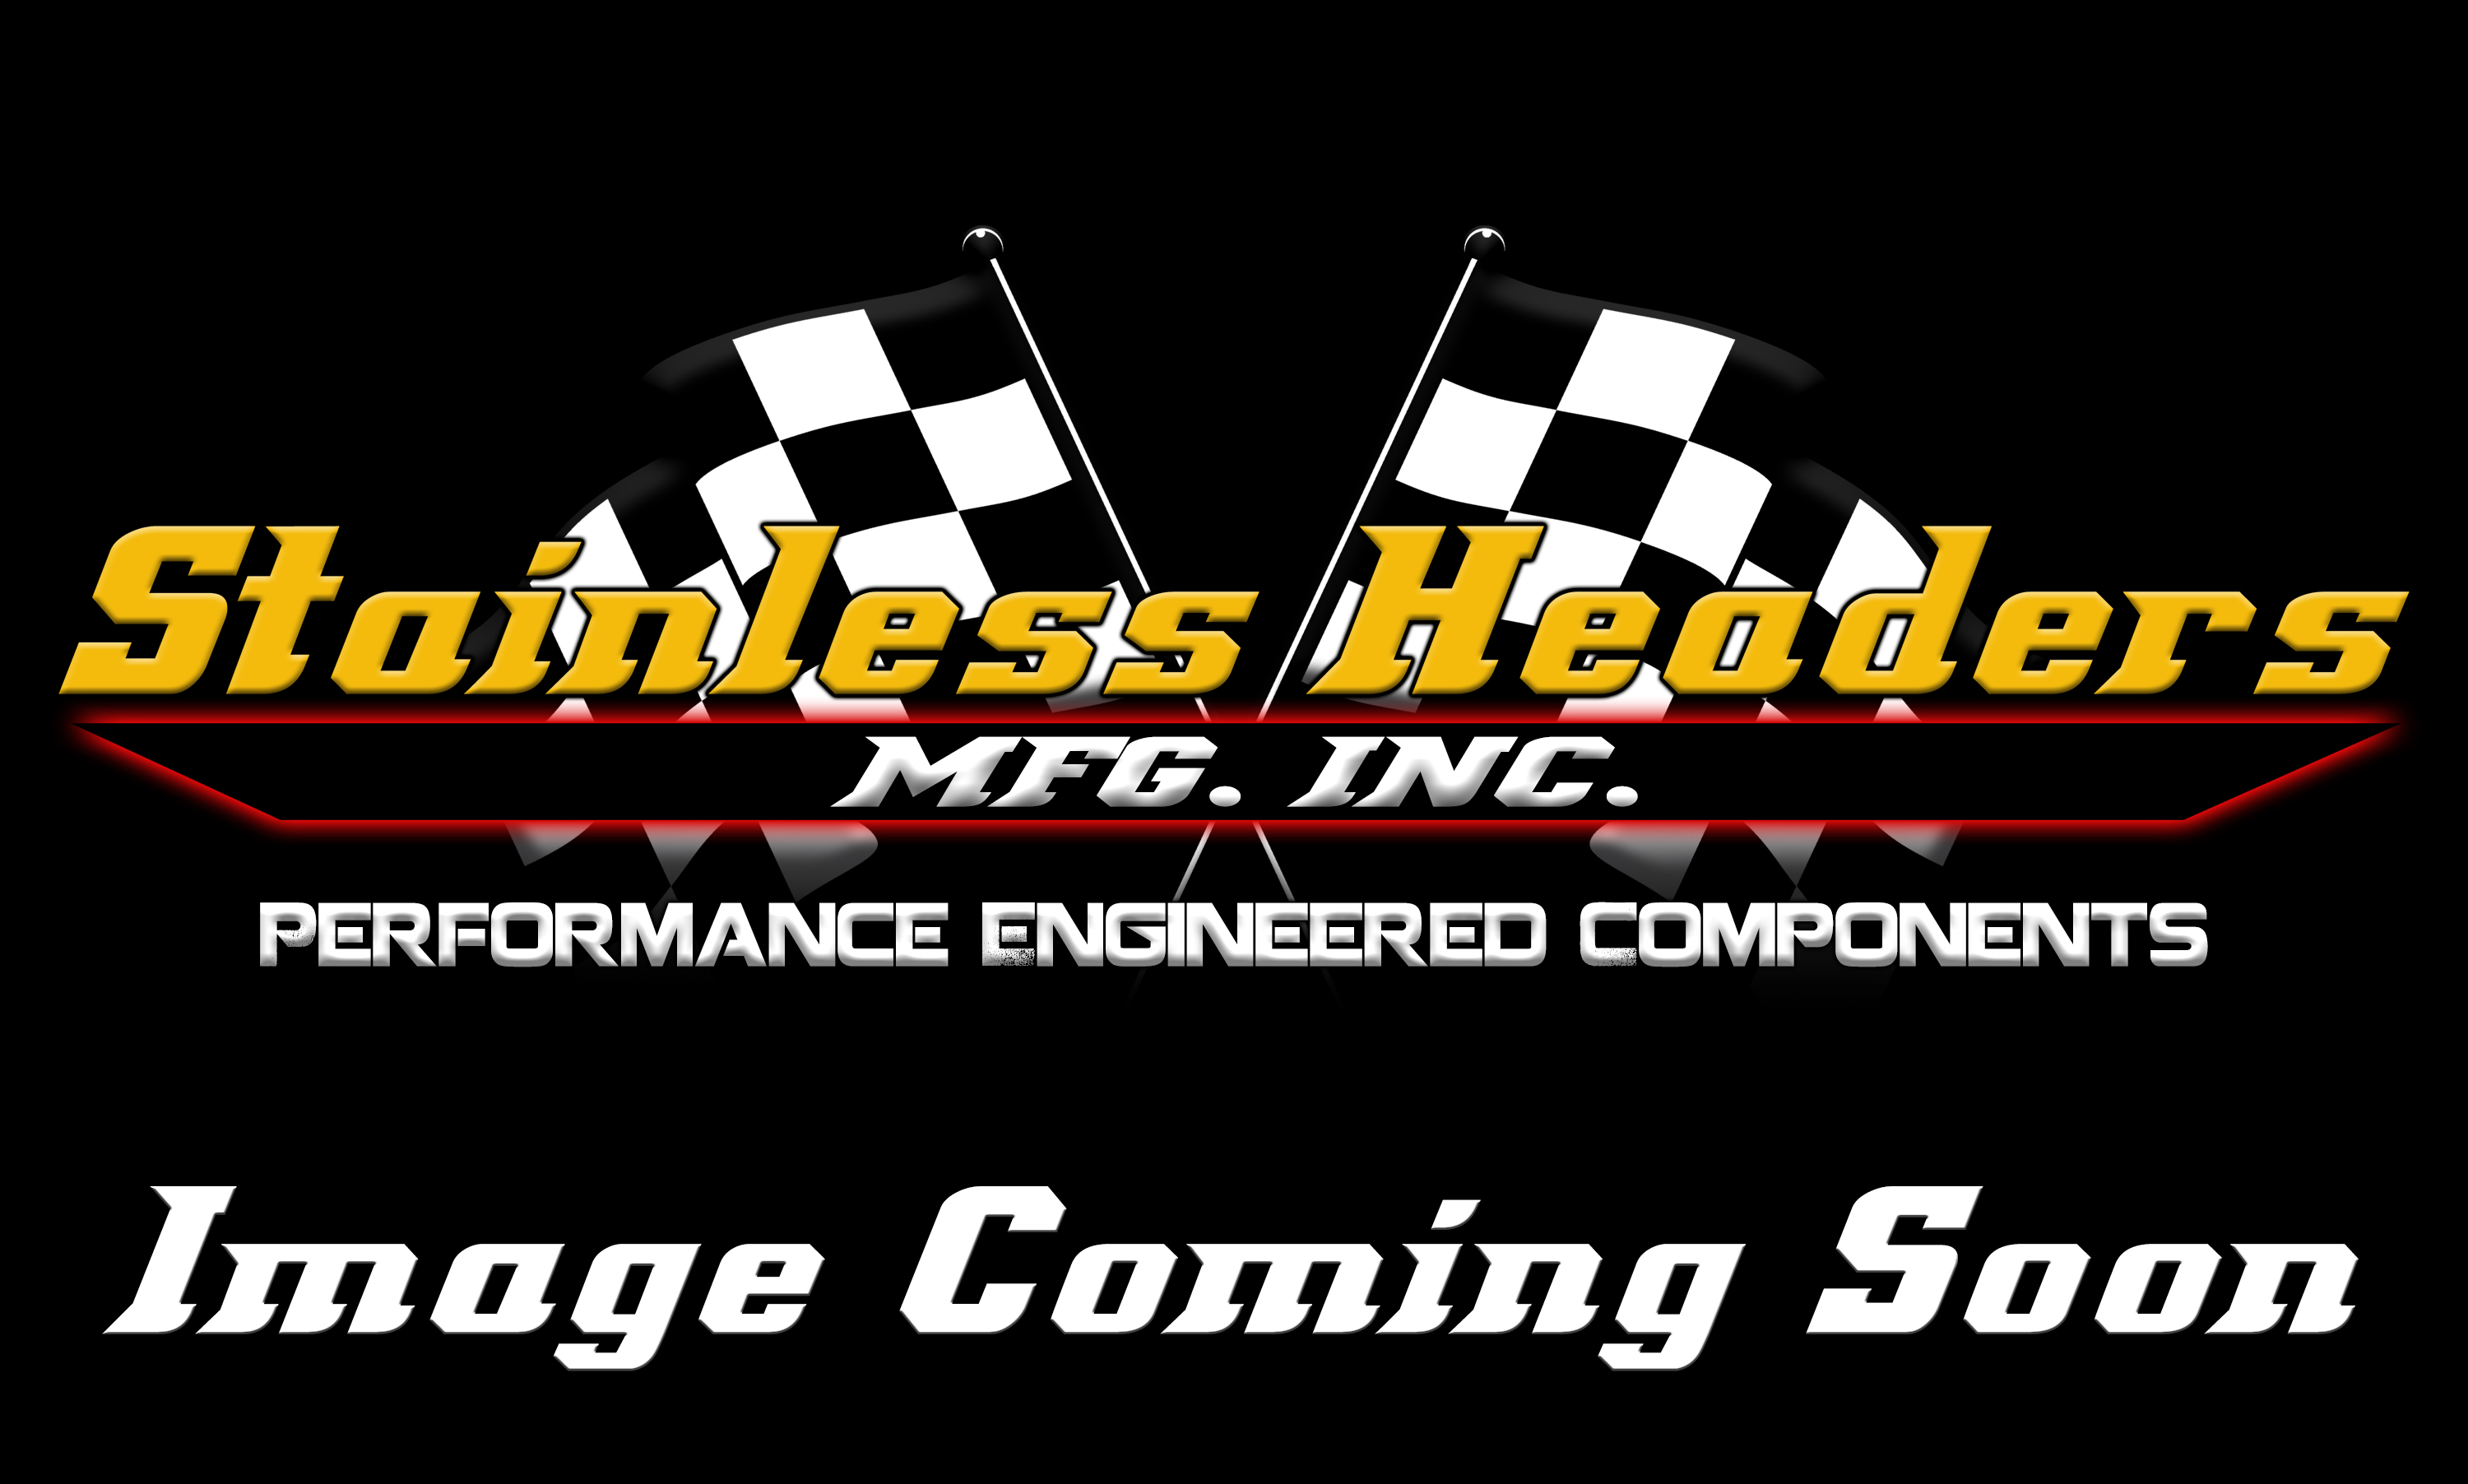 Stainless Headers - 2 1/2" Primary 5 into 1 Performance Merge Collector-18ga 321ss